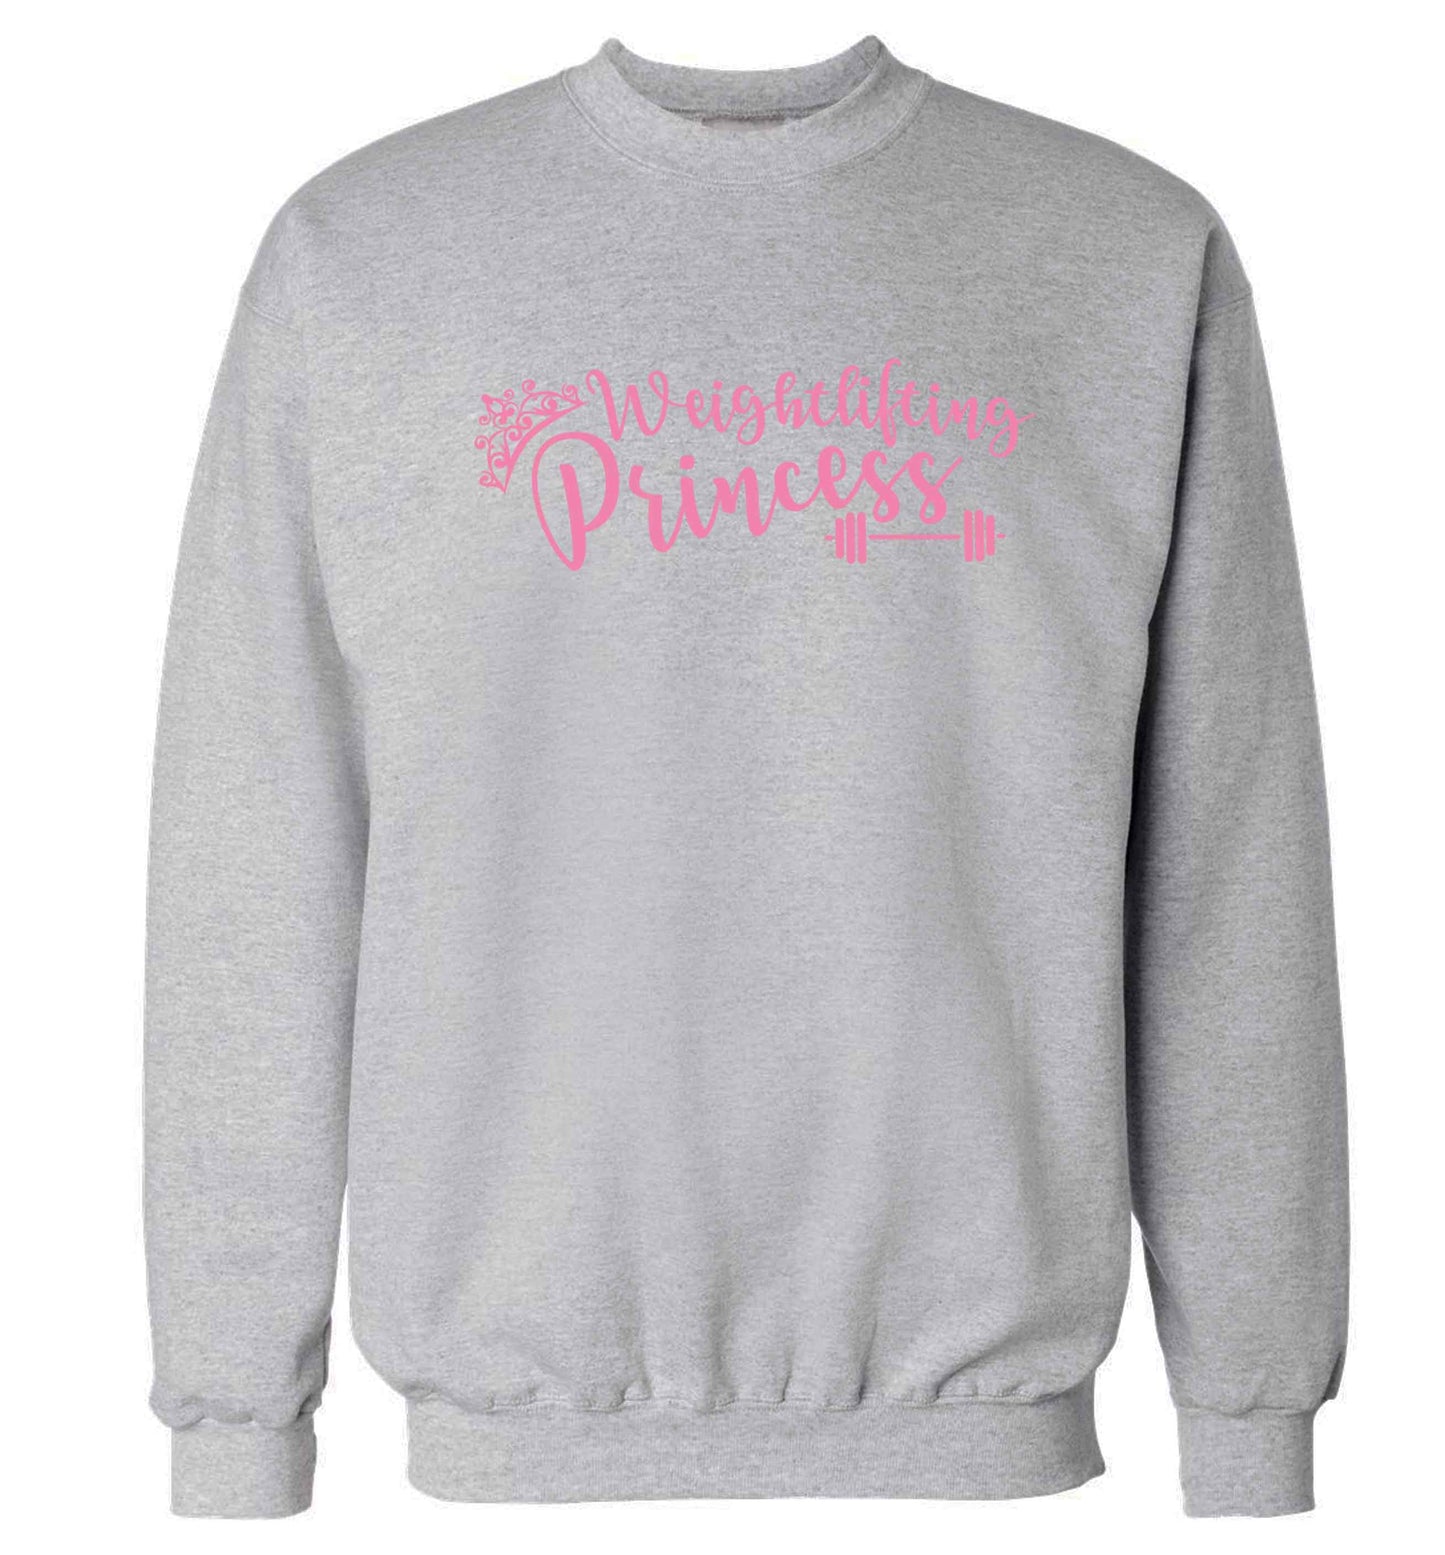 Weightlifting princess Adult's unisex grey Sweater 2XL